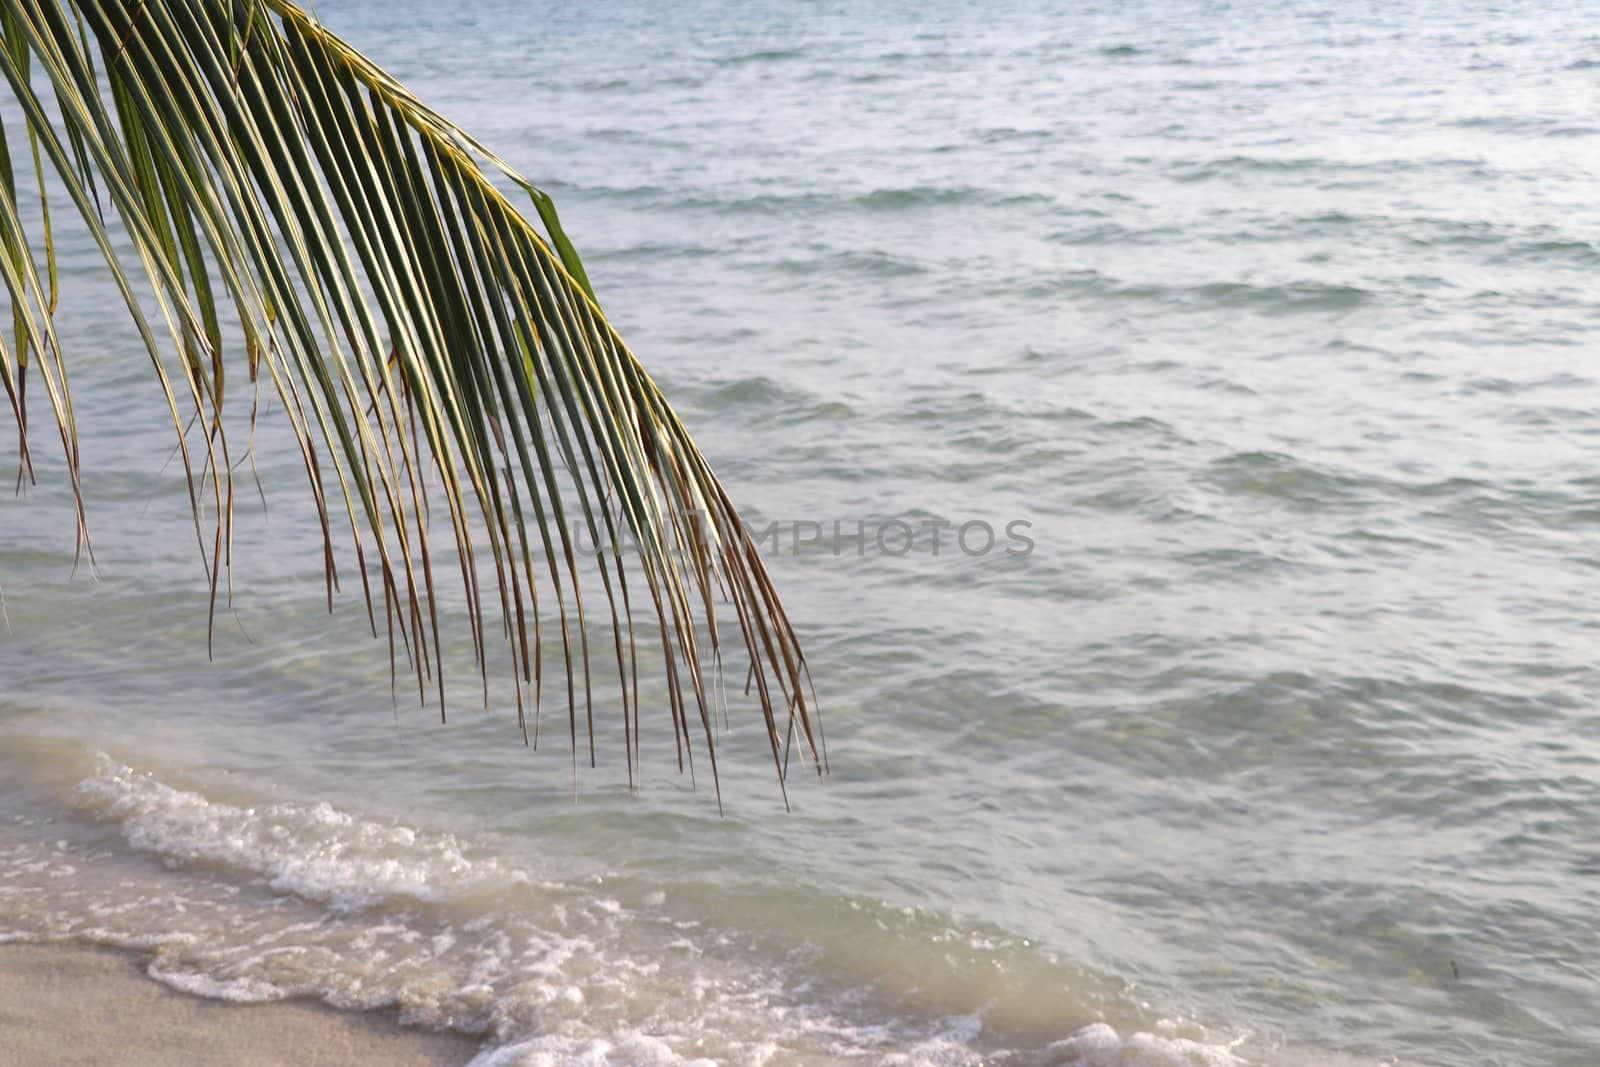 The stem of the coconut tree with a beach background.